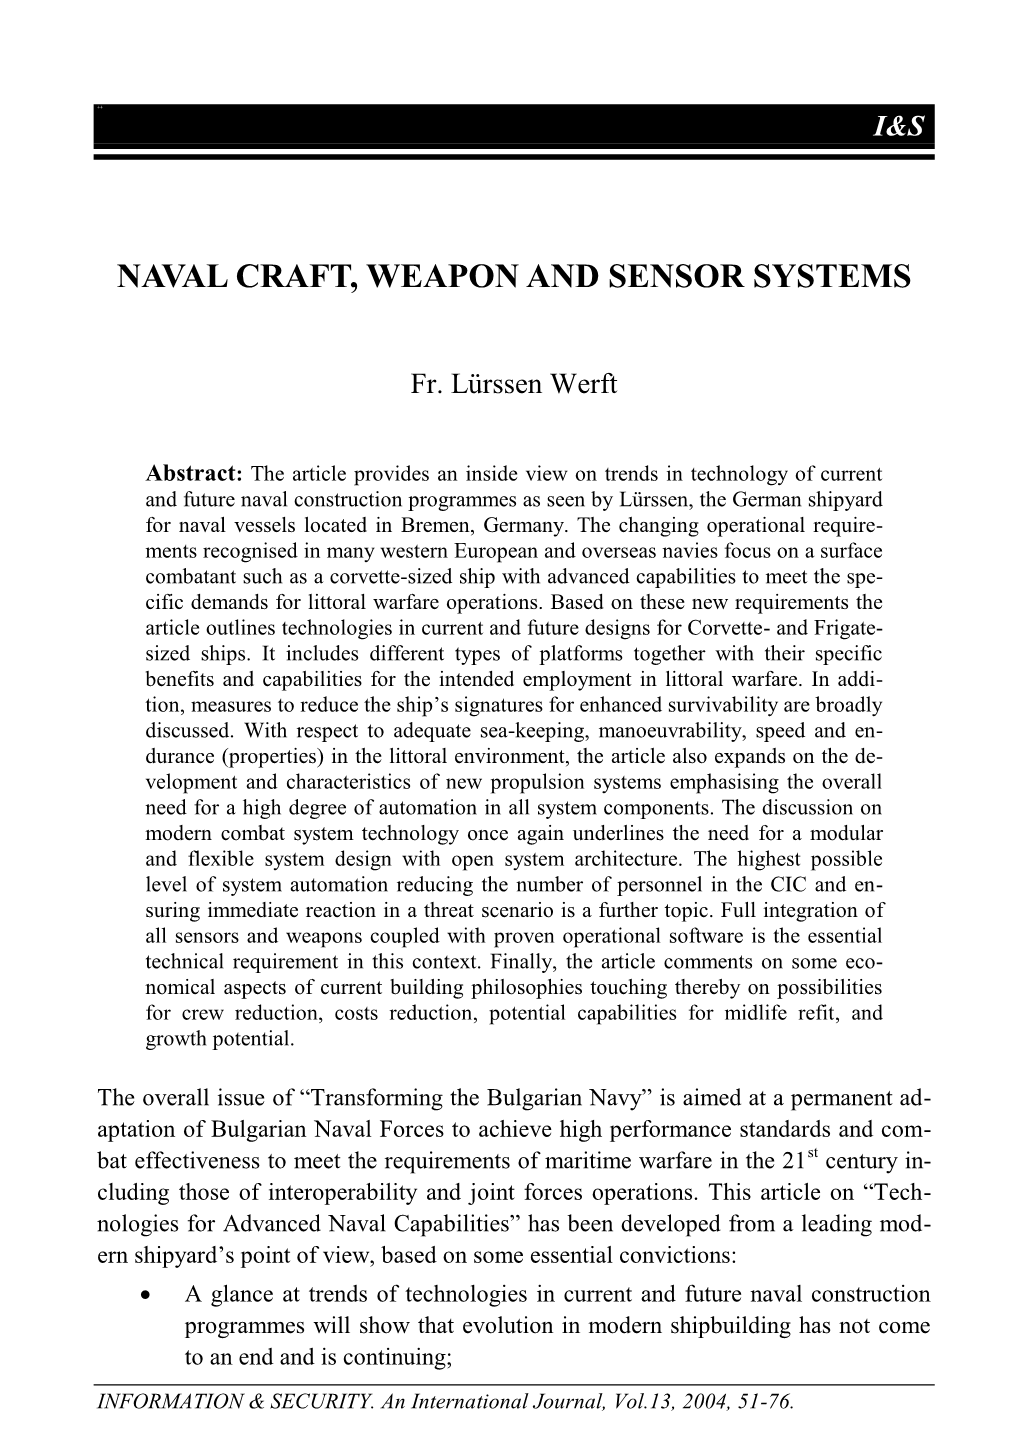 Naval Craft, Weapon and Sensor Systems